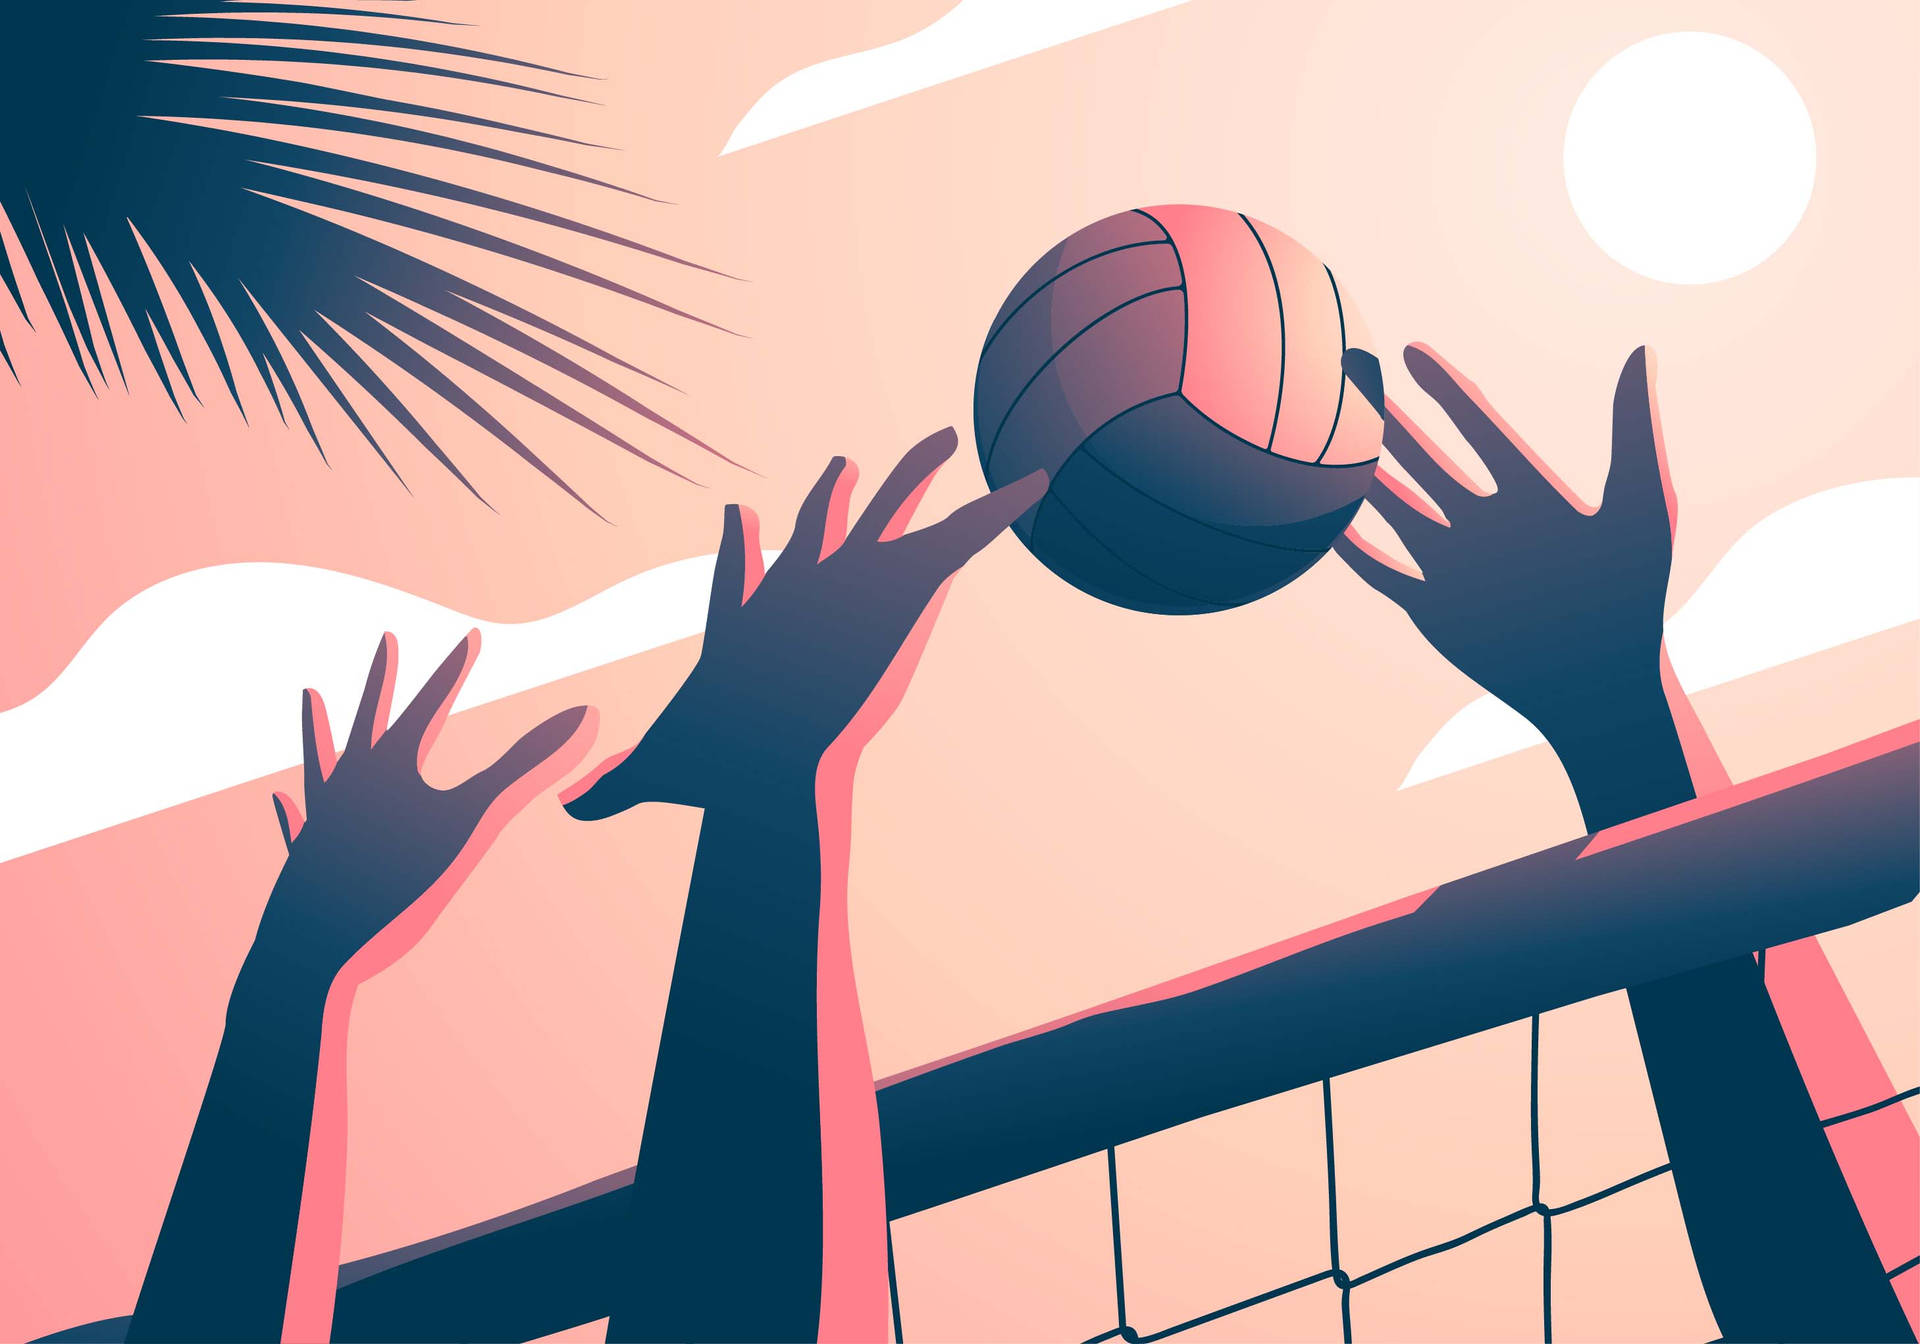 Download Volleyball Aesthetic Volleyball Life Wallpaper  Wallpaperscom